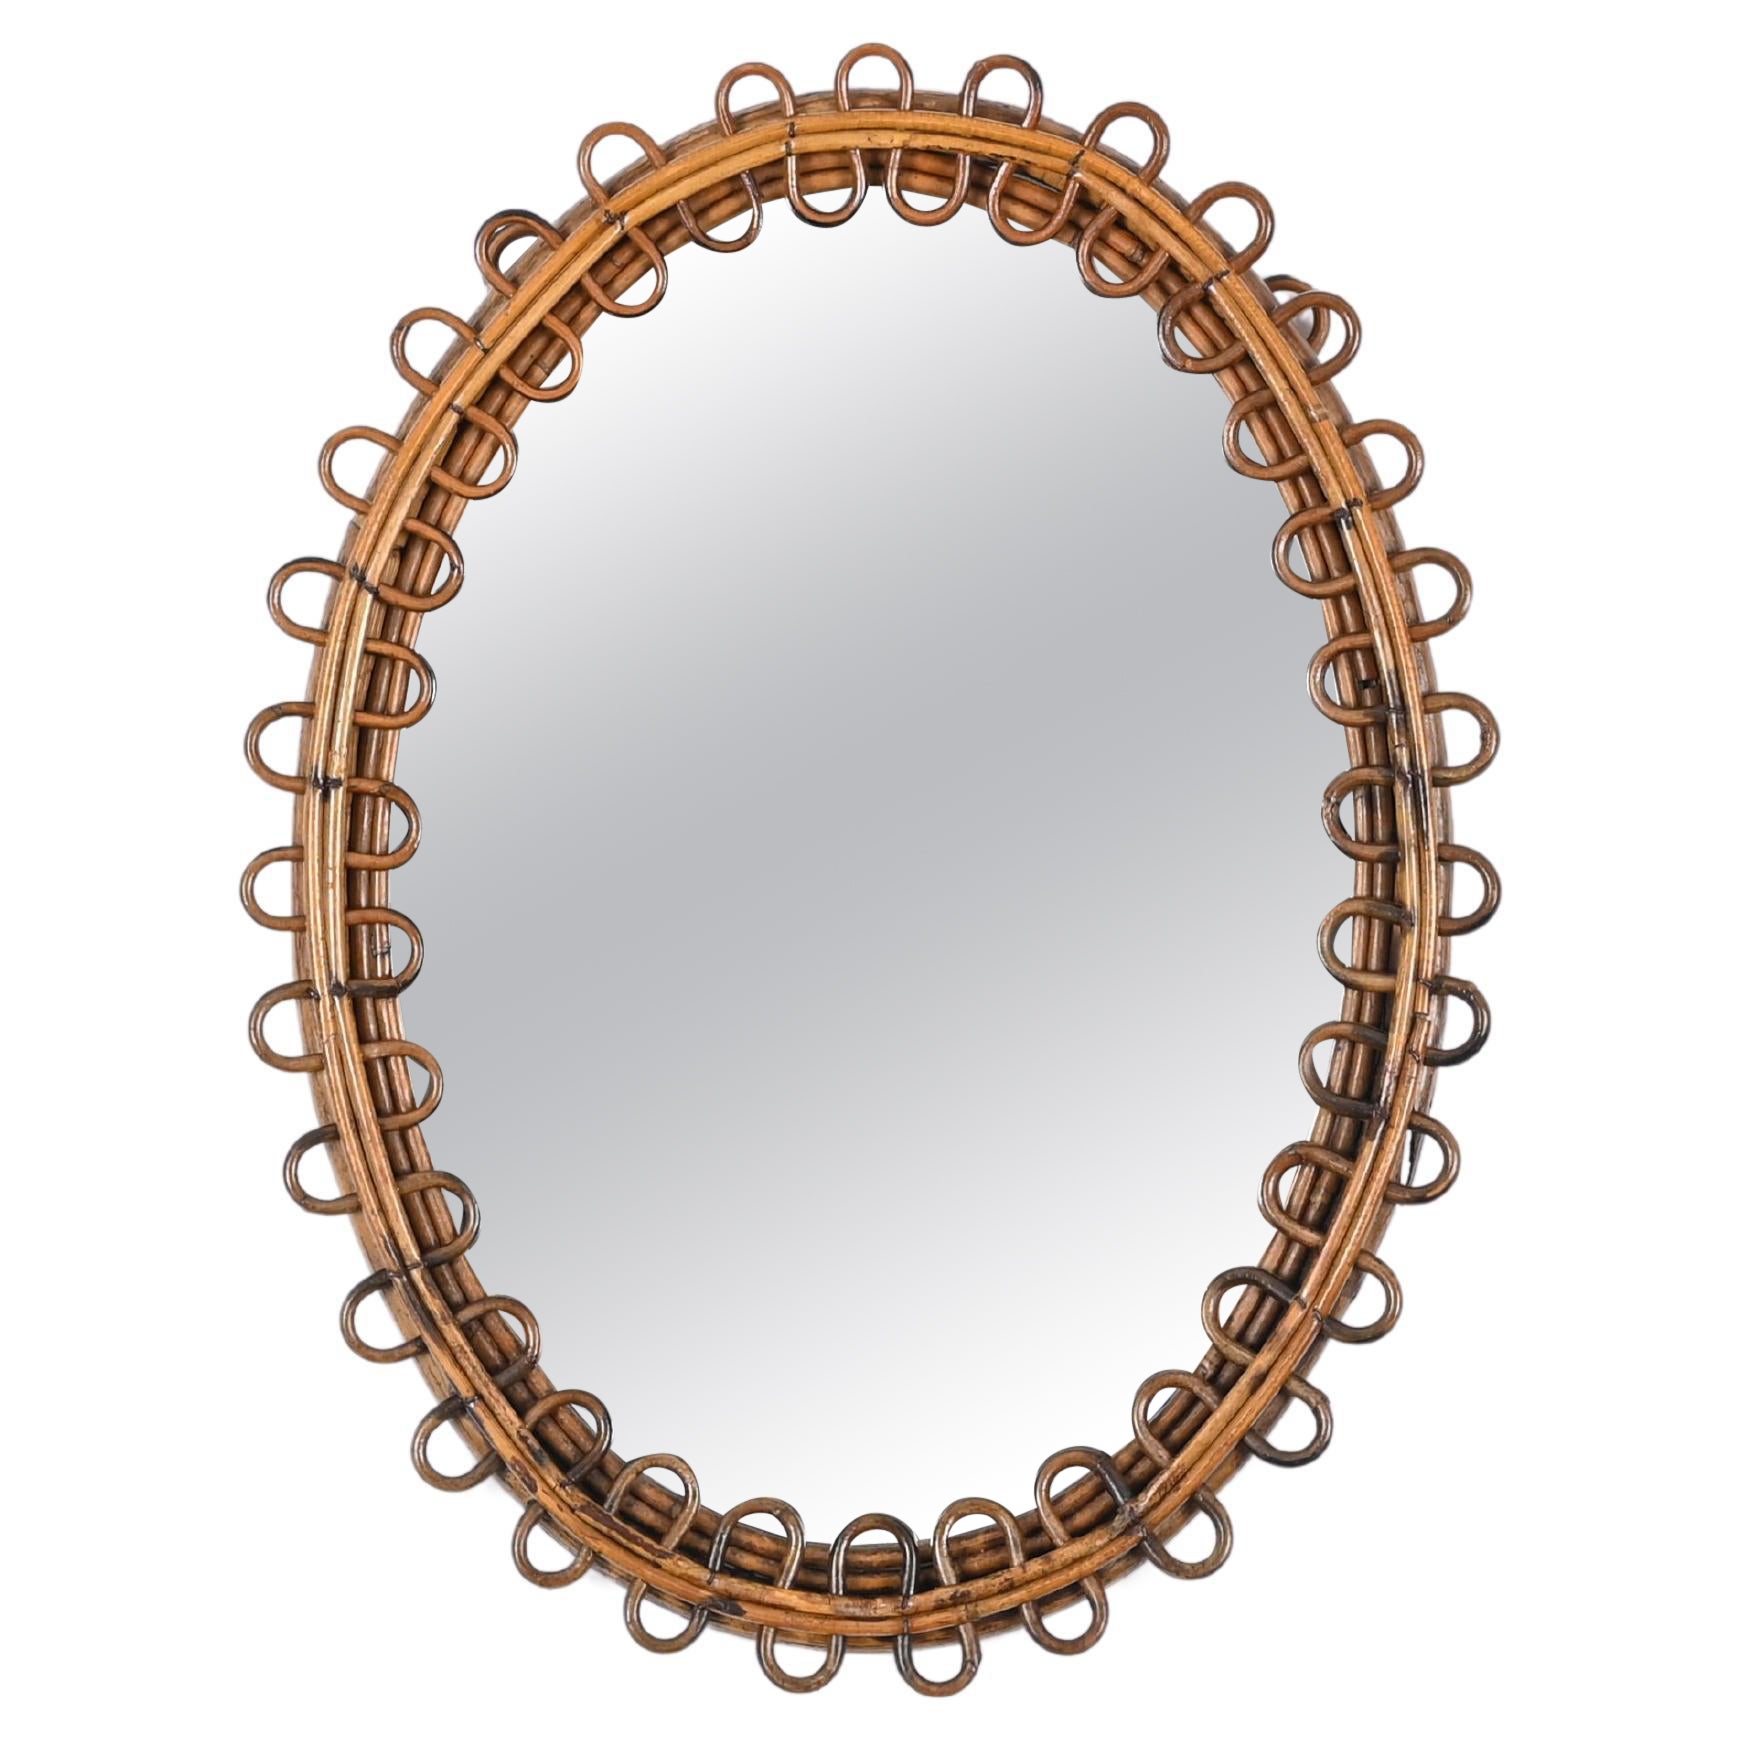 Midcentury French Riviera Oval Mirror in Rattan and Bamboo, Italy 1960s